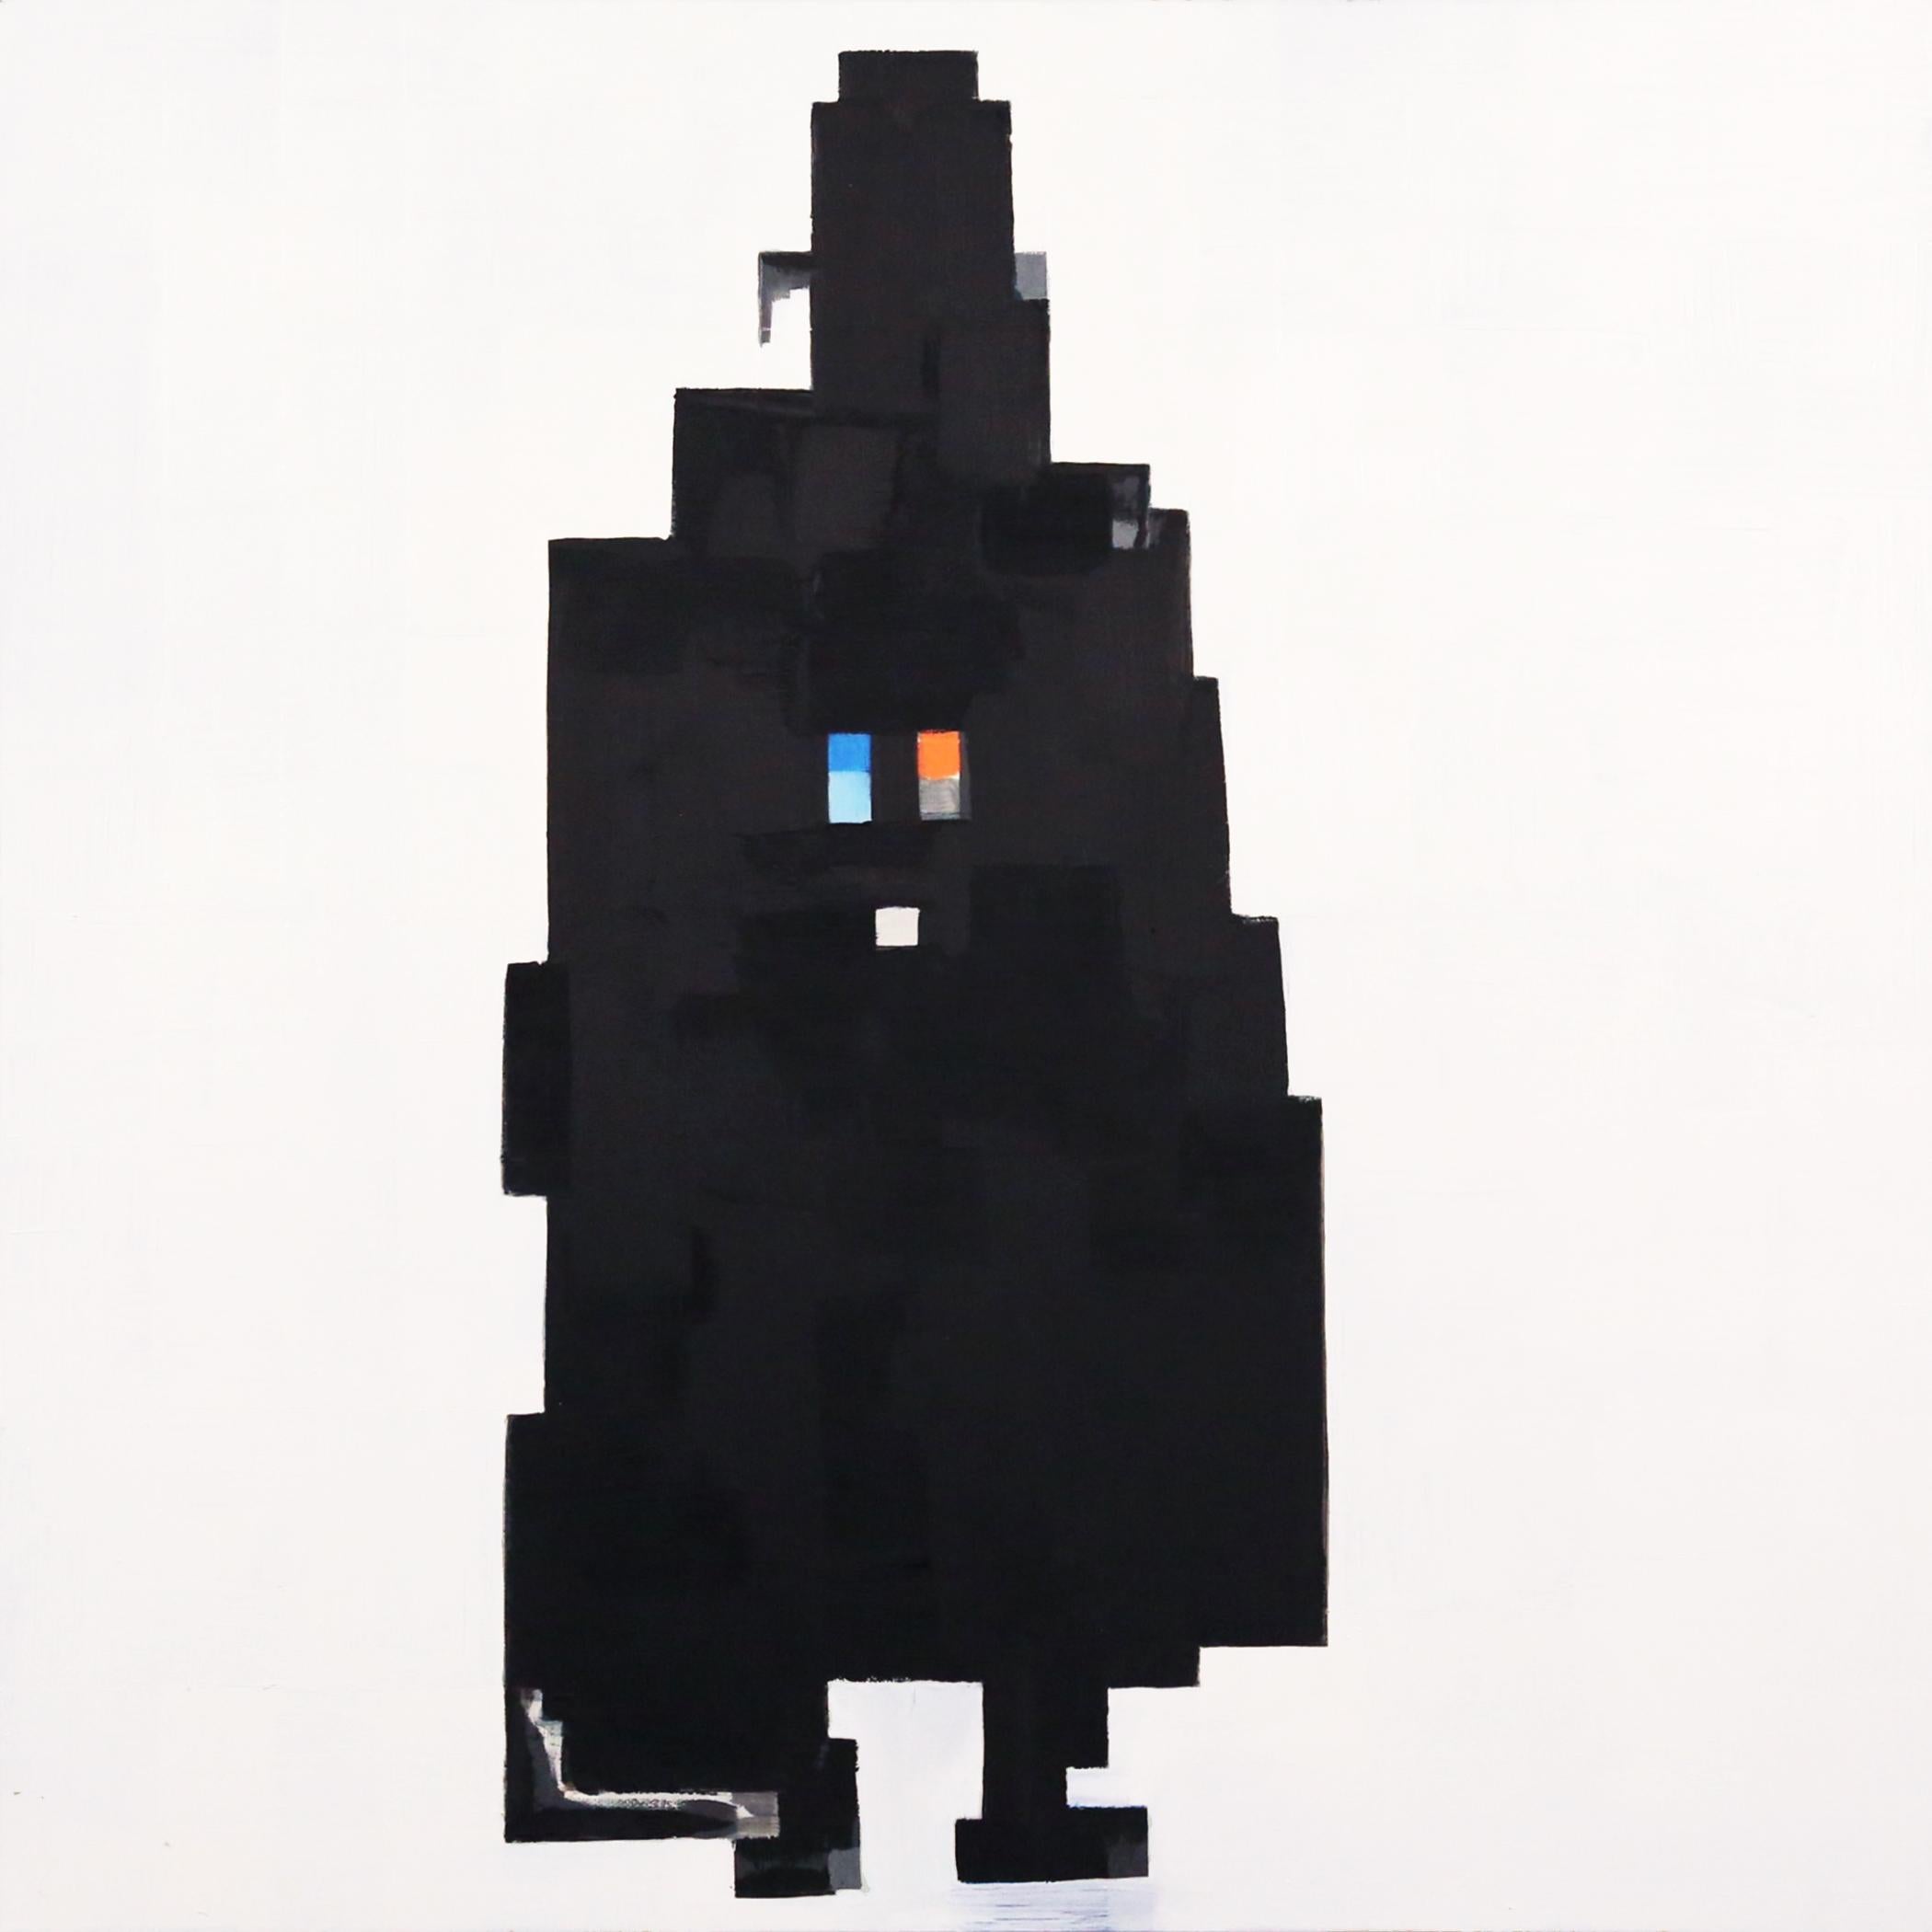 Robert Hightower Abstract Painting - "Captain Industry' - Contemporary Geometric Abstraction - Pixelation - Bosch